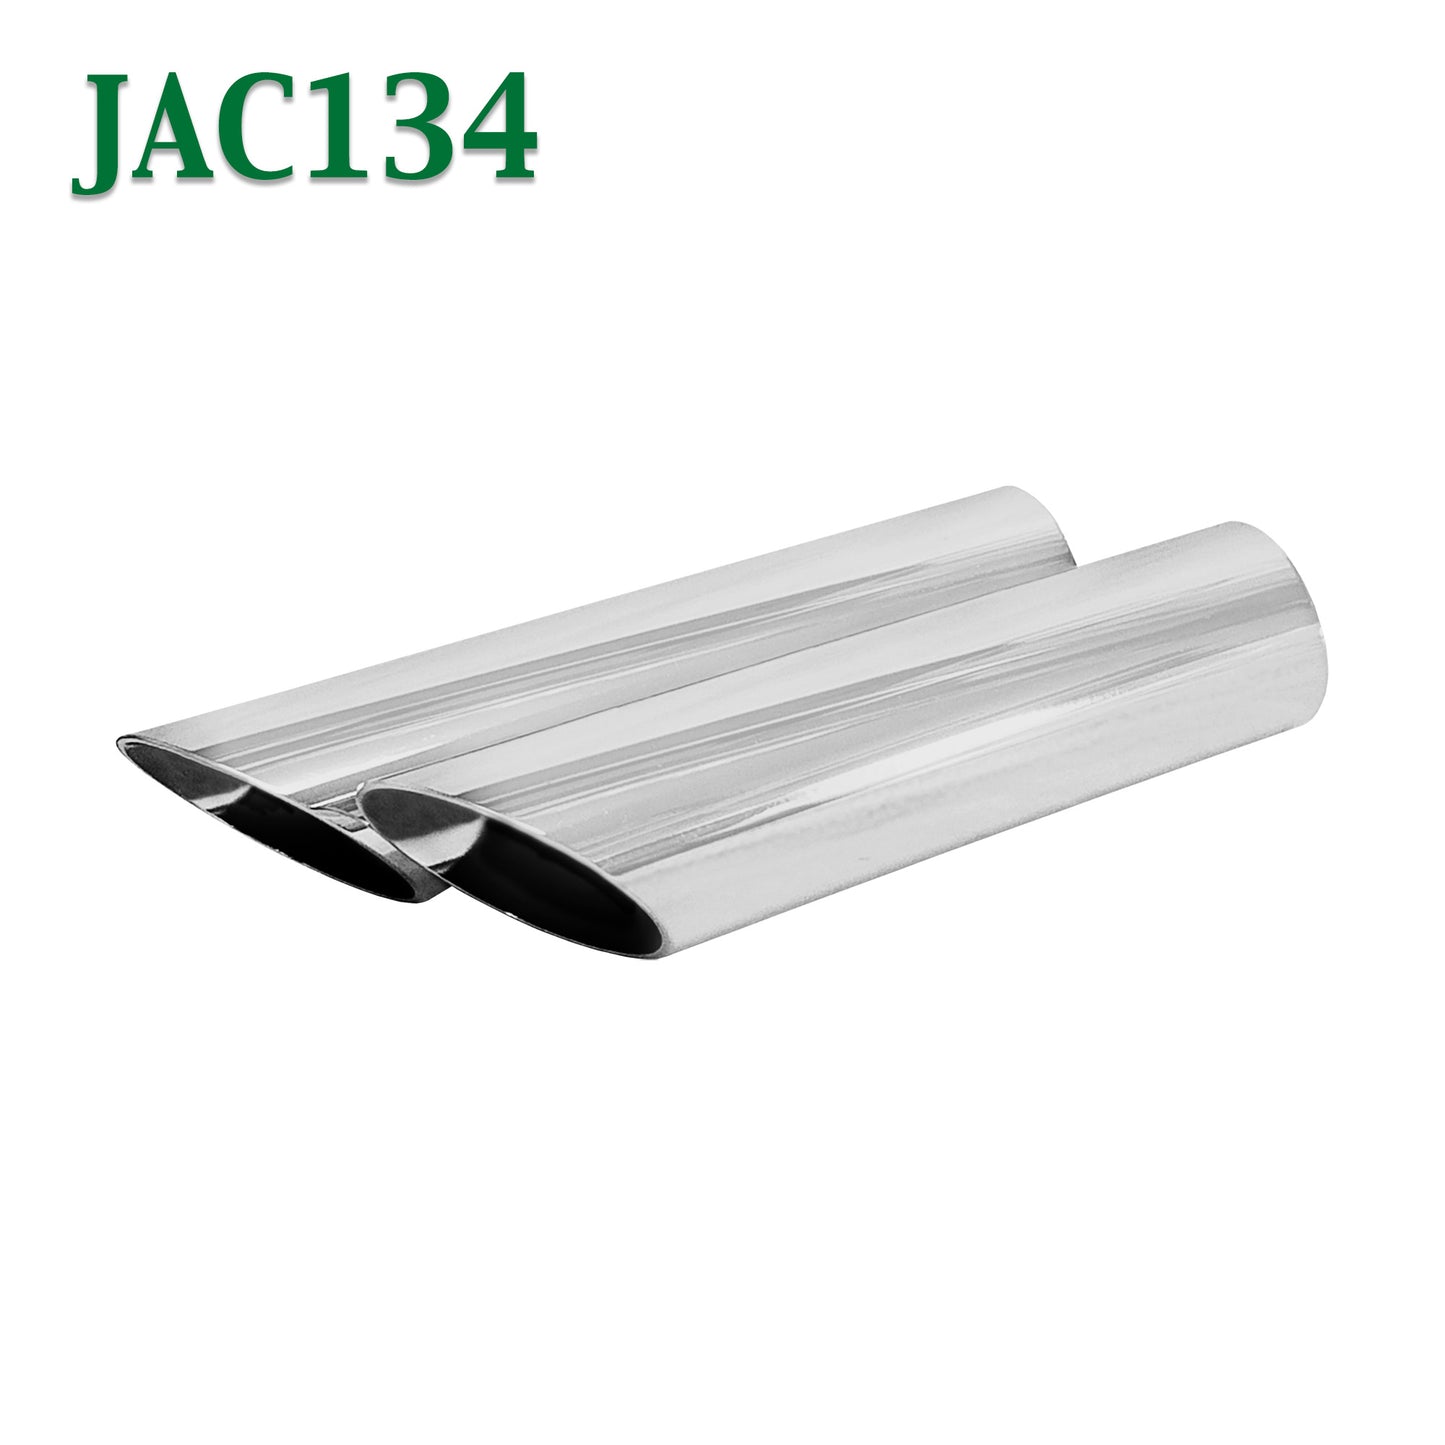 JAC134 1.75" Chrome Angle Cut Cowboy Exhaust Tip 1 3/4-1 13/16" Inlet / 2" Outlet / 8" Long